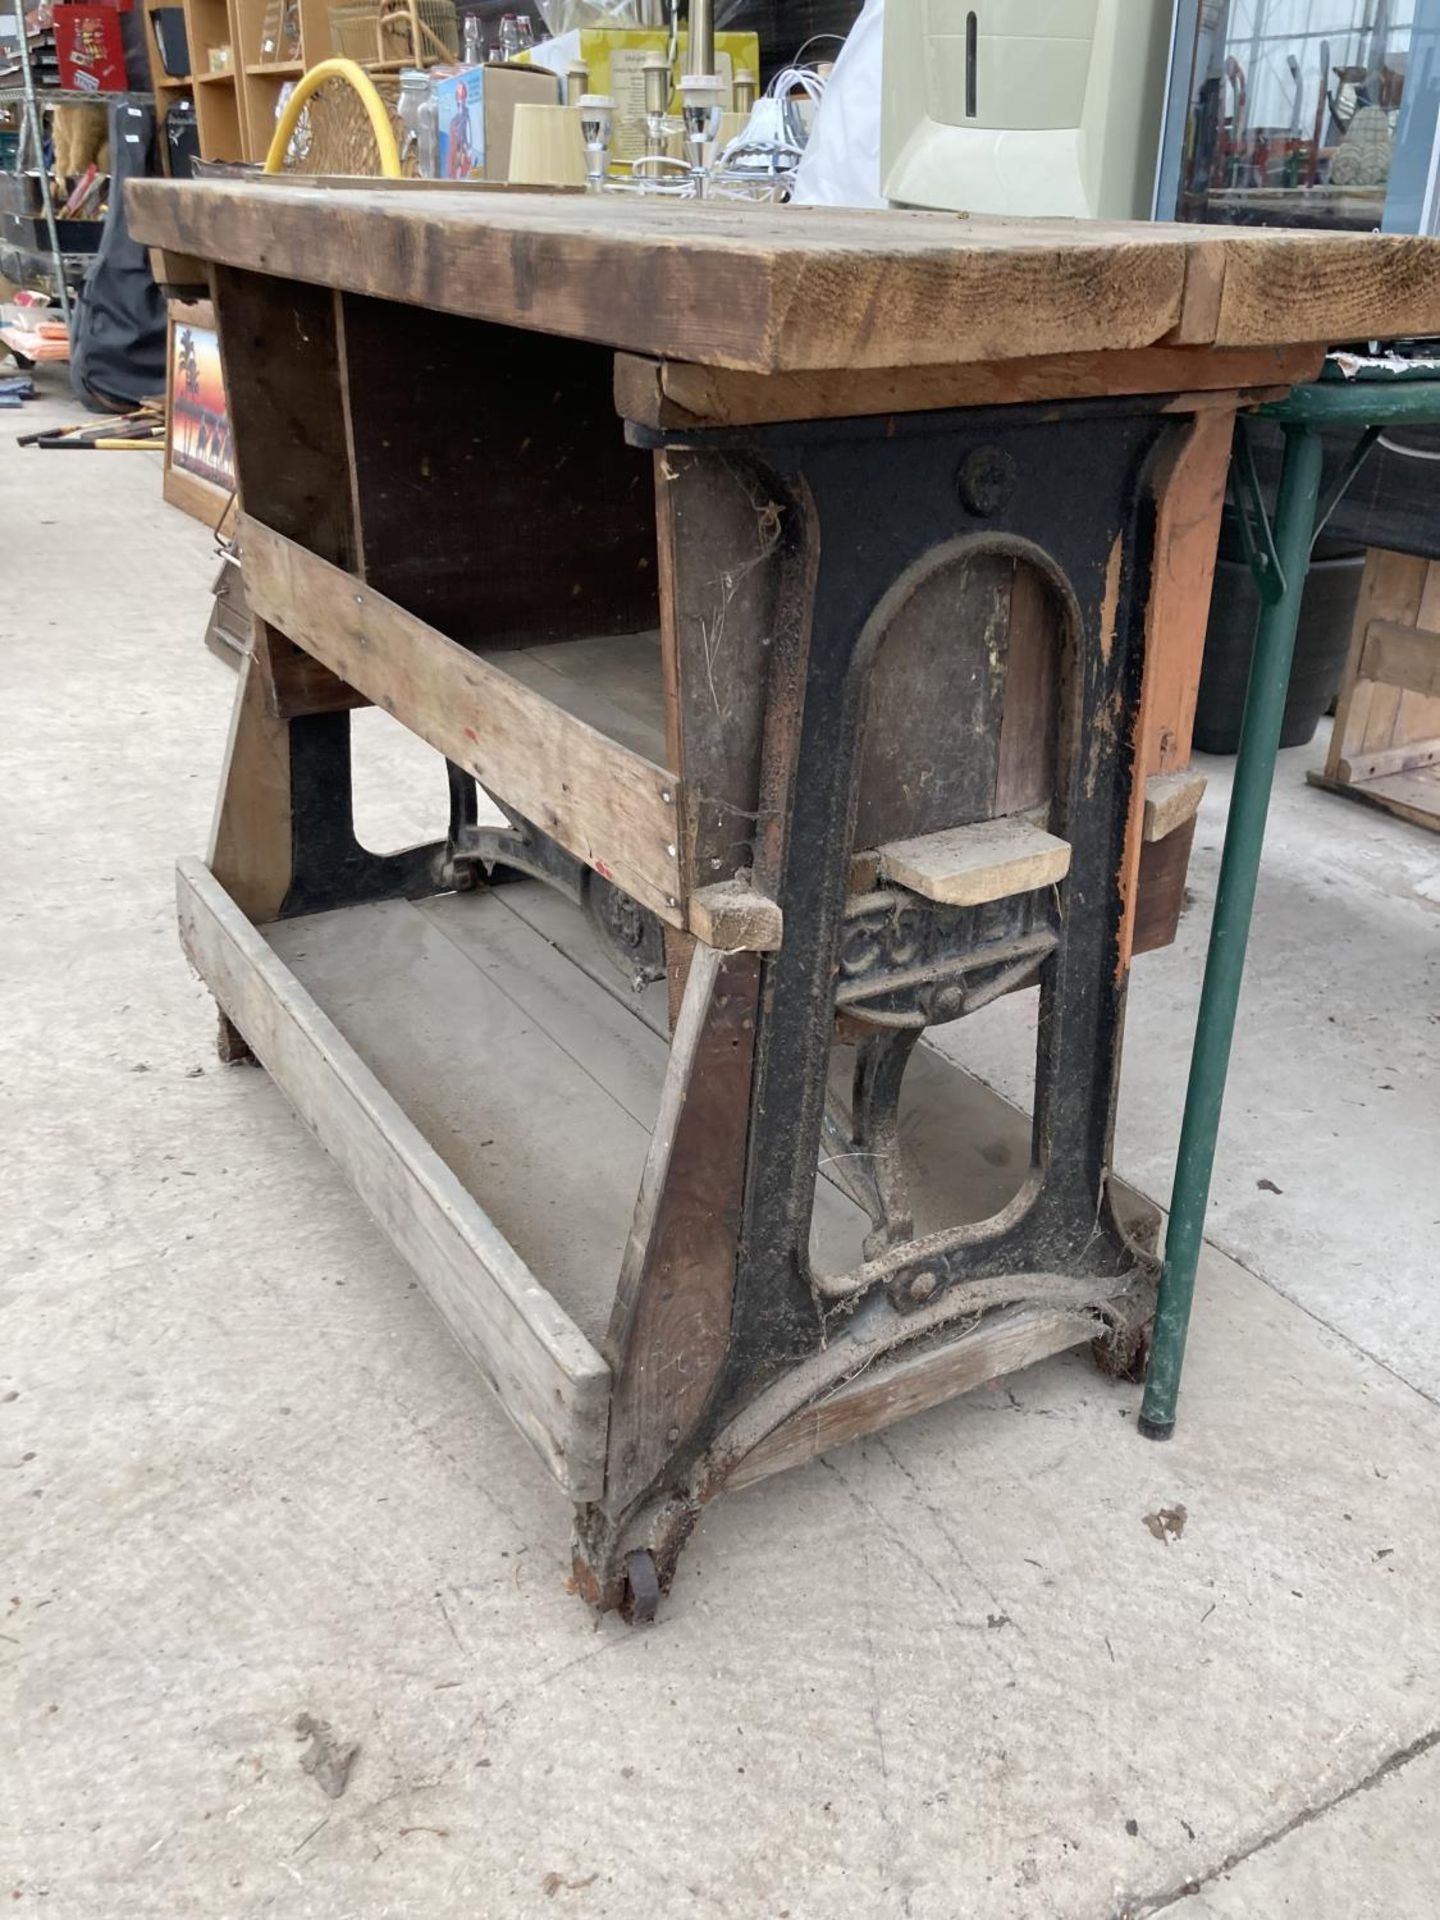 A VINTAGE WOODEN WORK BENCH WITH CAST IRON WHEELED BASE - Image 3 of 3